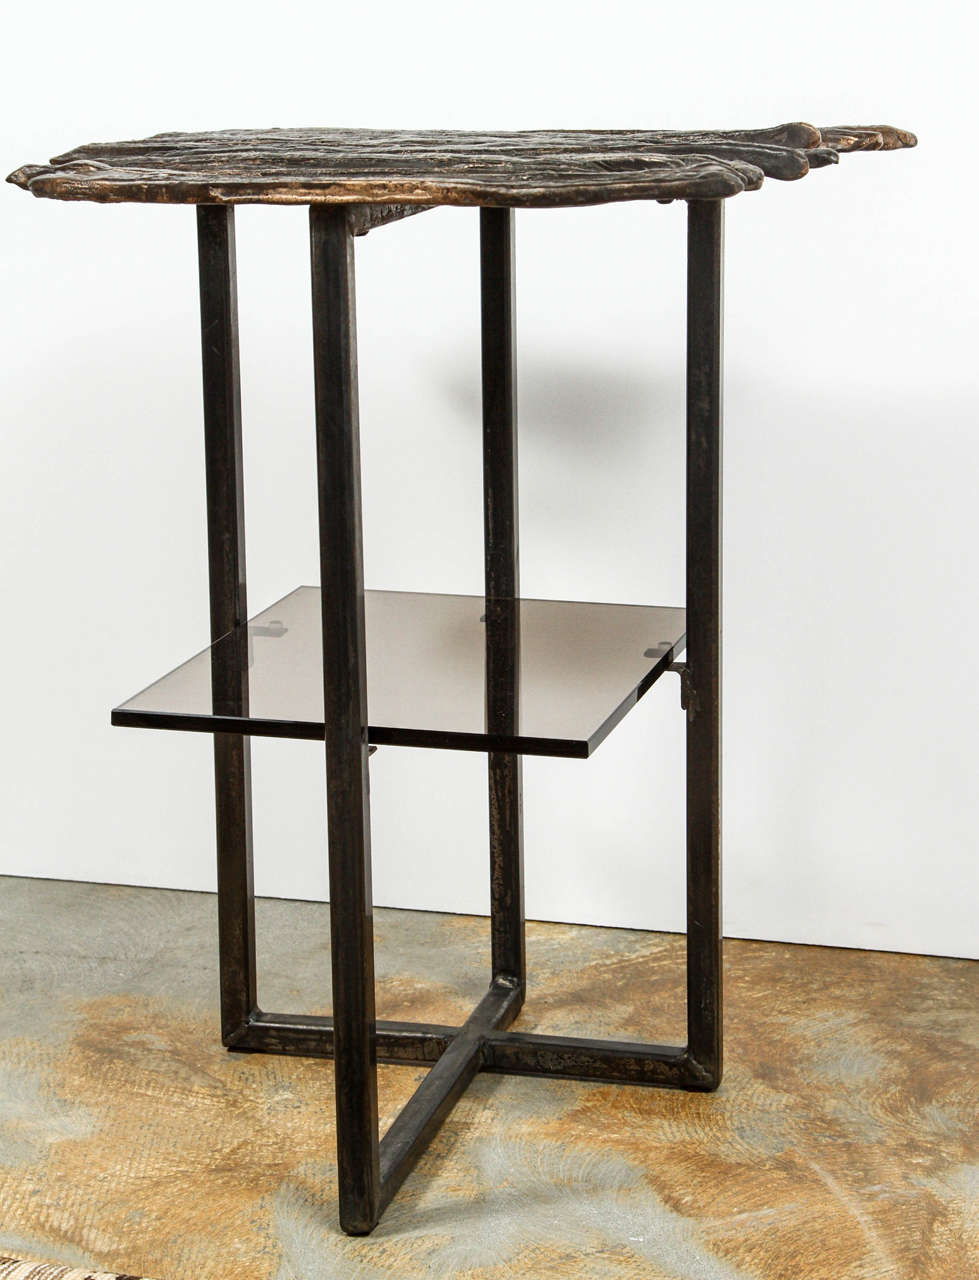 Modern, organic modern Paul Marra cast bronze Pod Table. Cast bronze and steel with bronze patina and with bronze tinted glass shelf. Two currently in stock; price is per table.